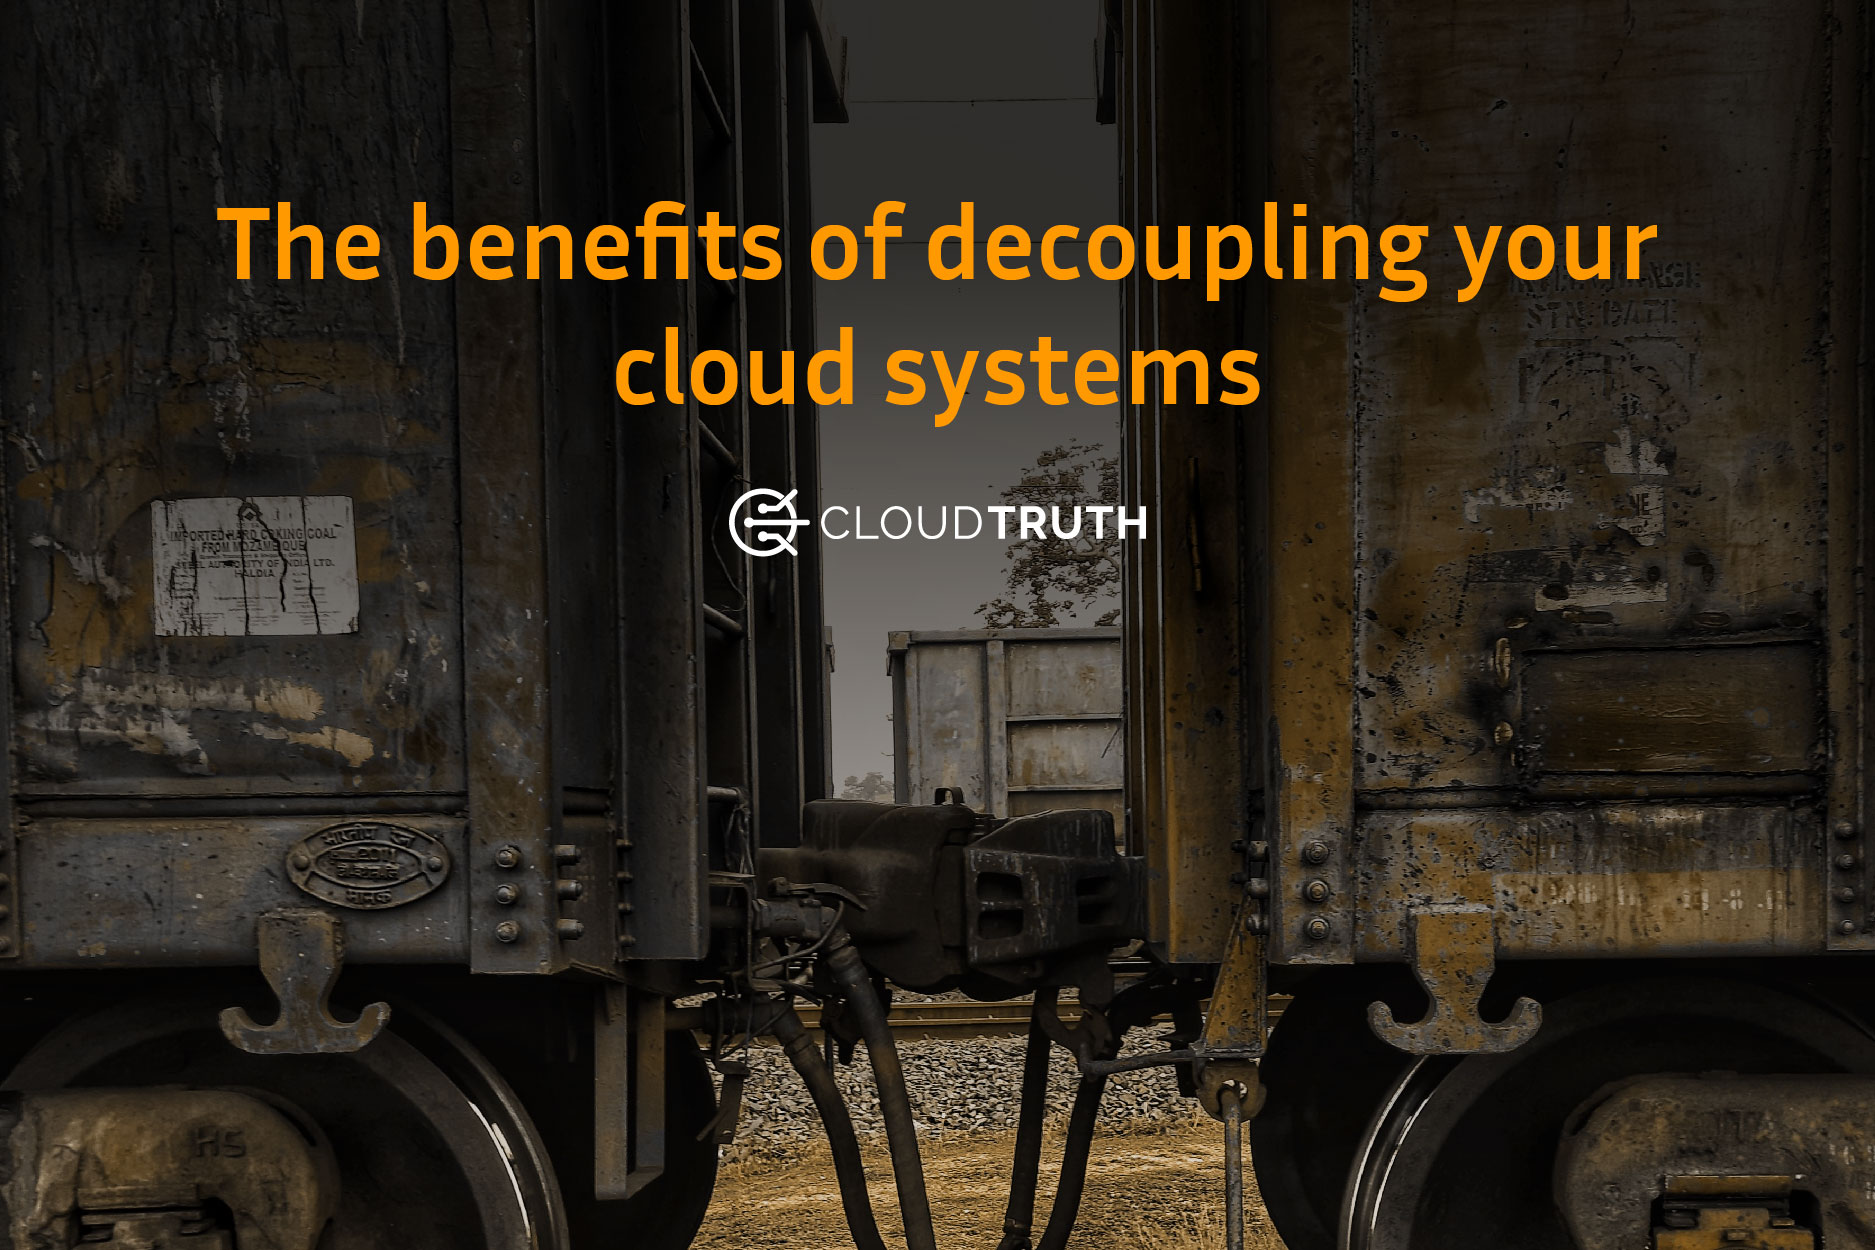 Decoupling Your Cloud Systems Can Reduce Complexity — But At What Cost?